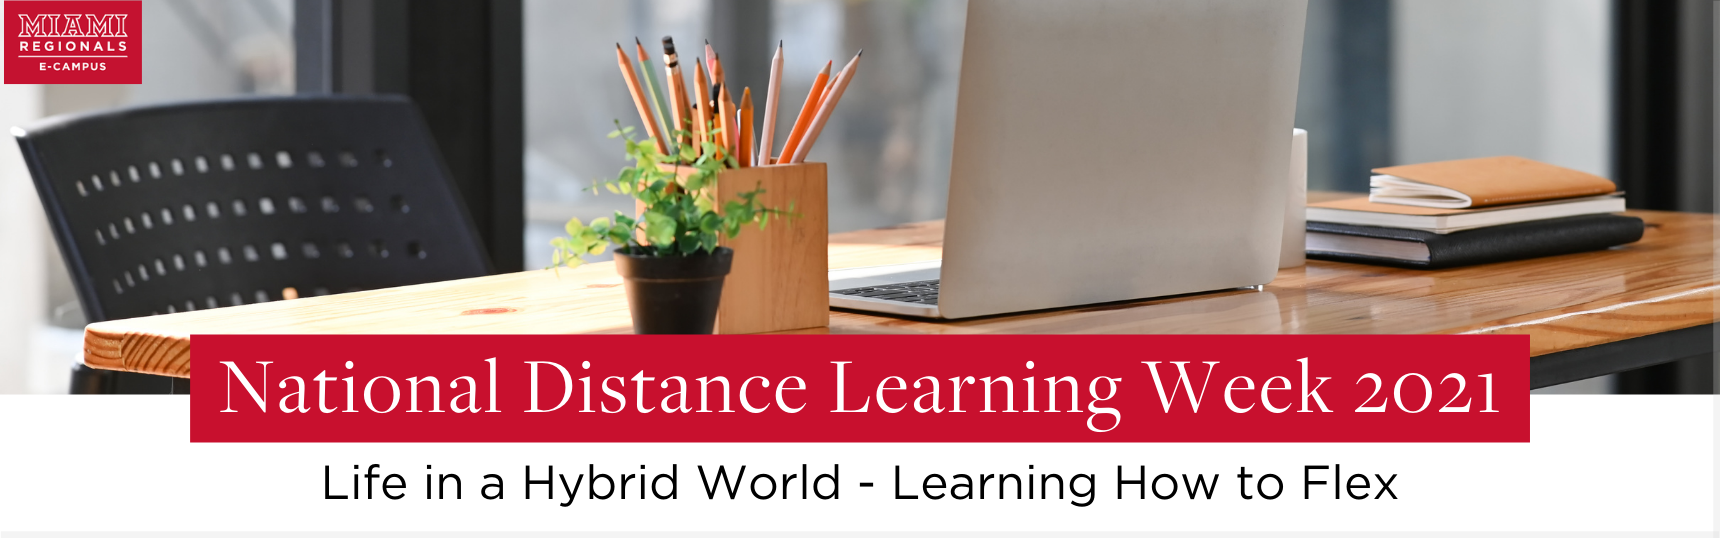 National Distance Learning Week 2021 - Life in a Hybrid World, Learning How to Flex 